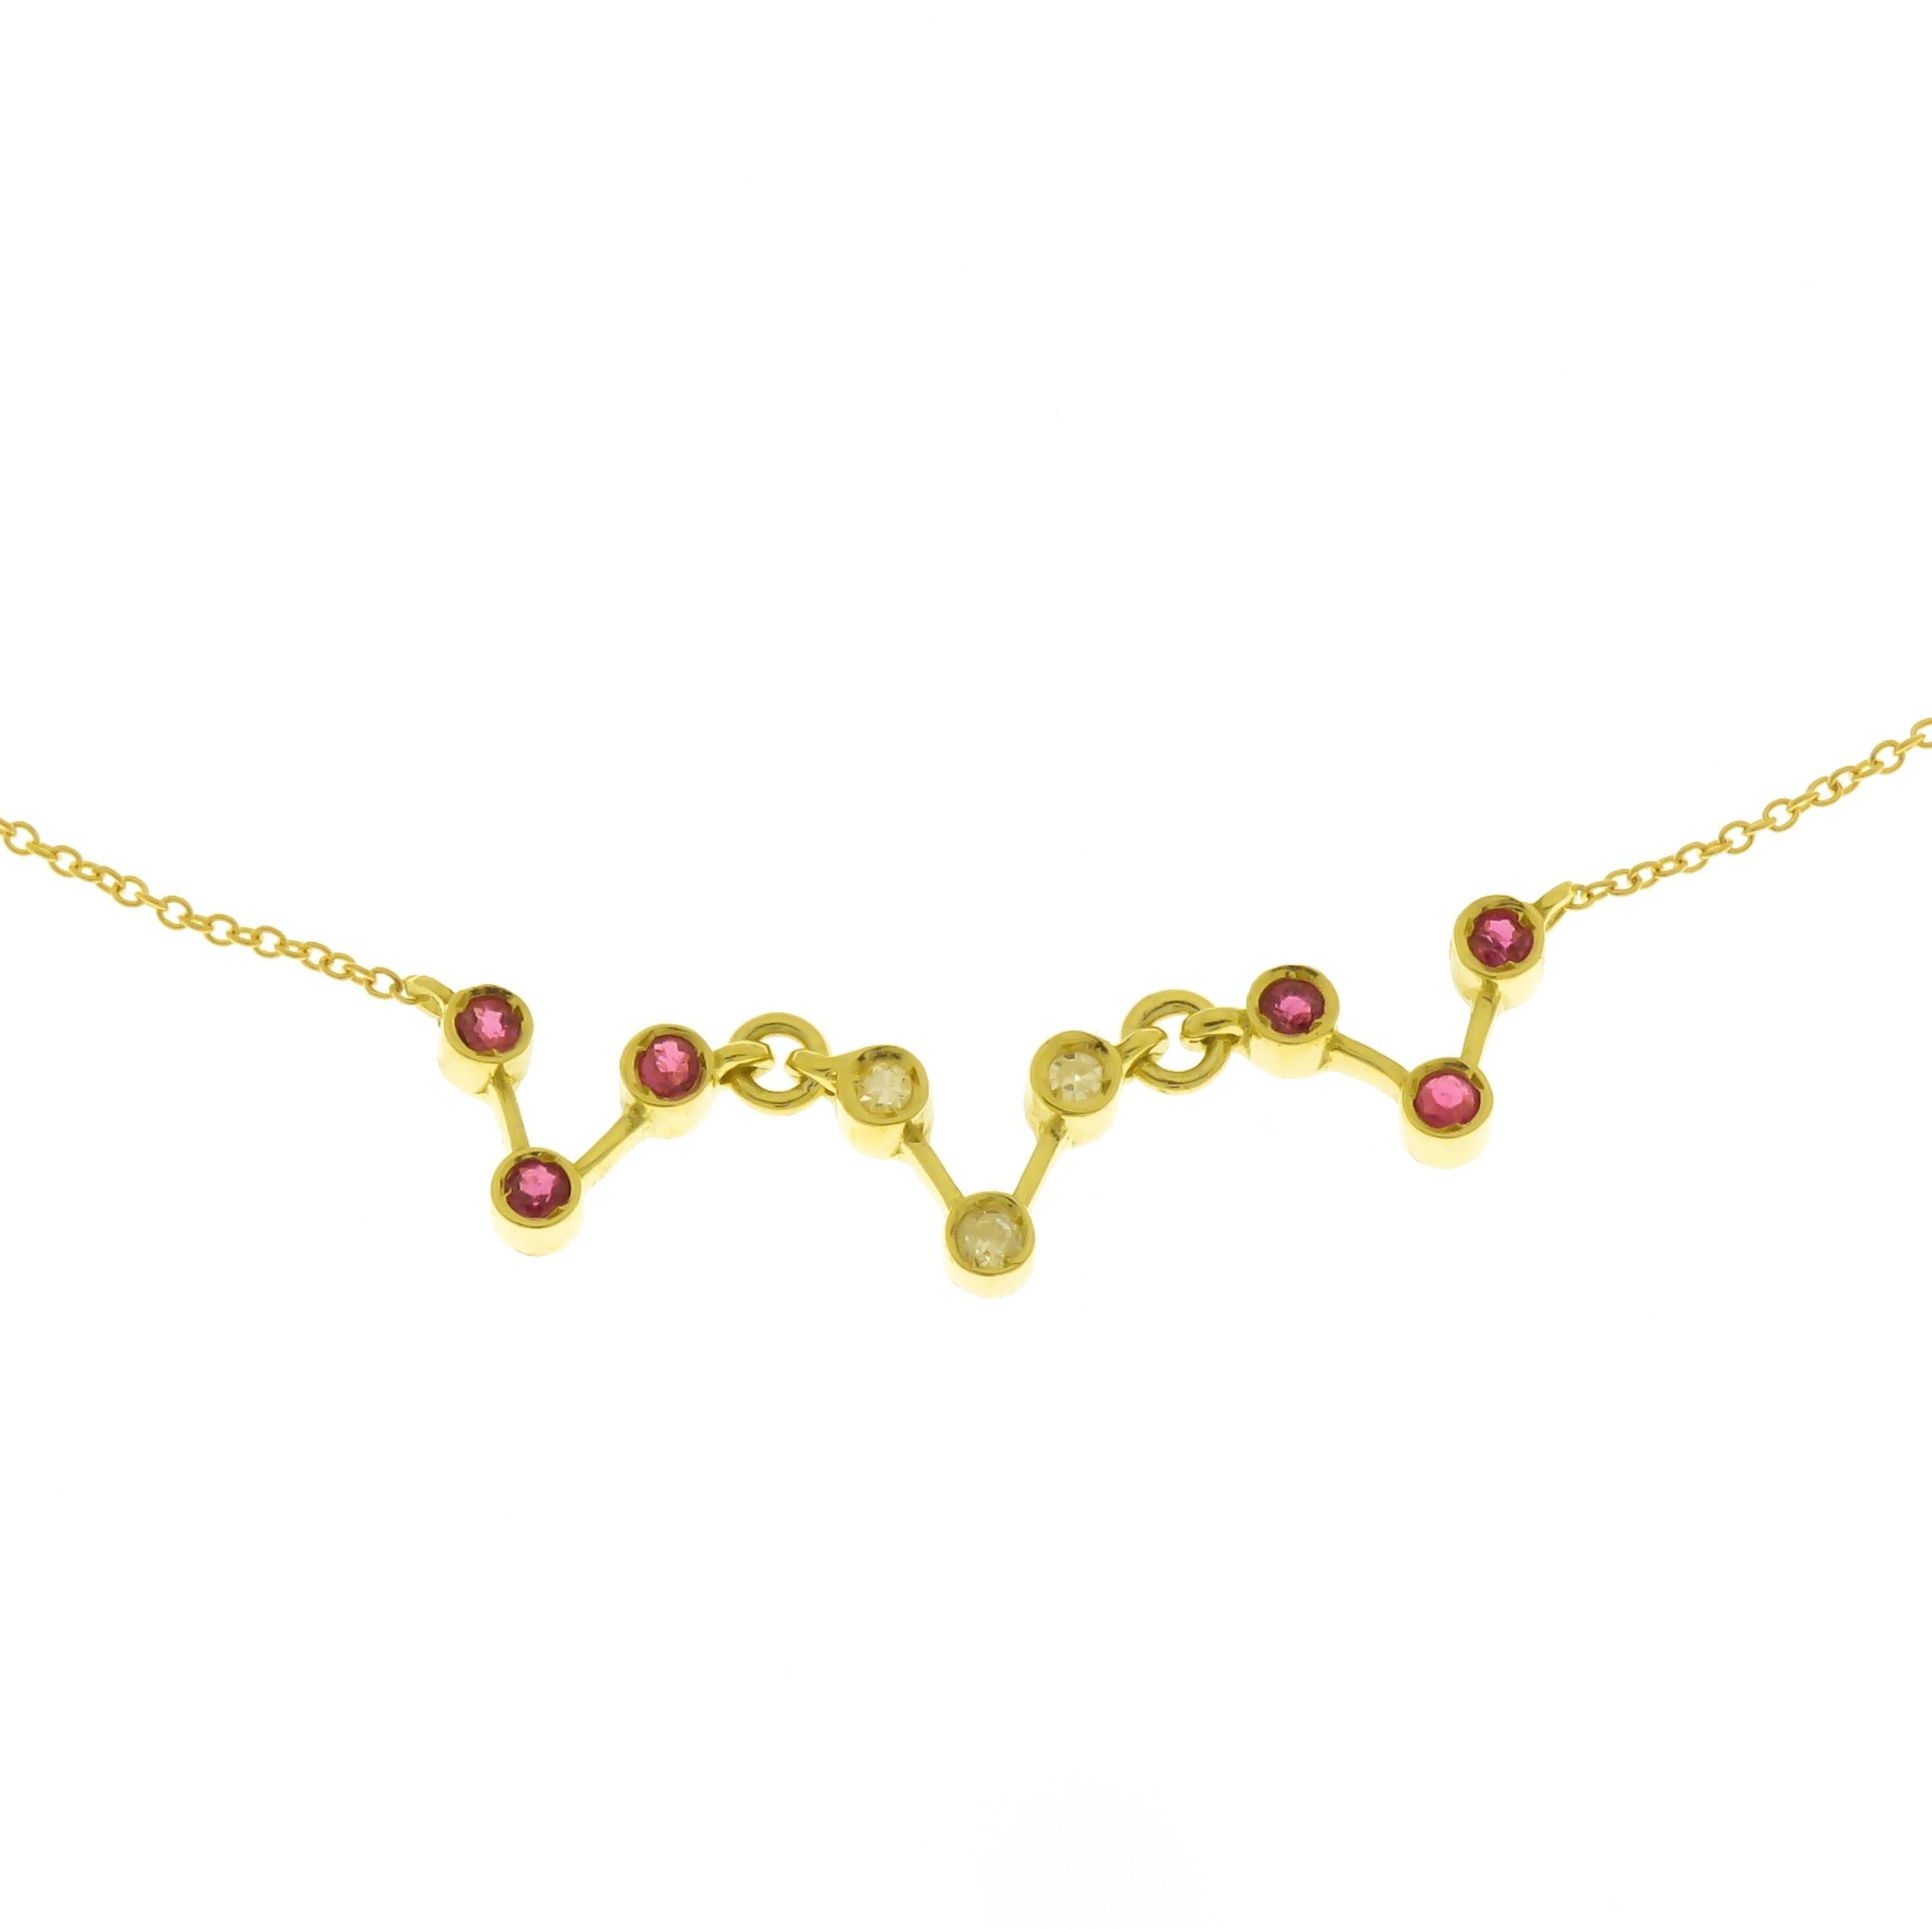 Beautiful necklace featuring 6 brilliant karat rubies and 3 briliant cut diamonds in a crown motif setting fastened to a rolo chain. Both setting and chain are crafted in 18 karat yellow gold. The necklace length is adjustable from 380 mm to 410 mm